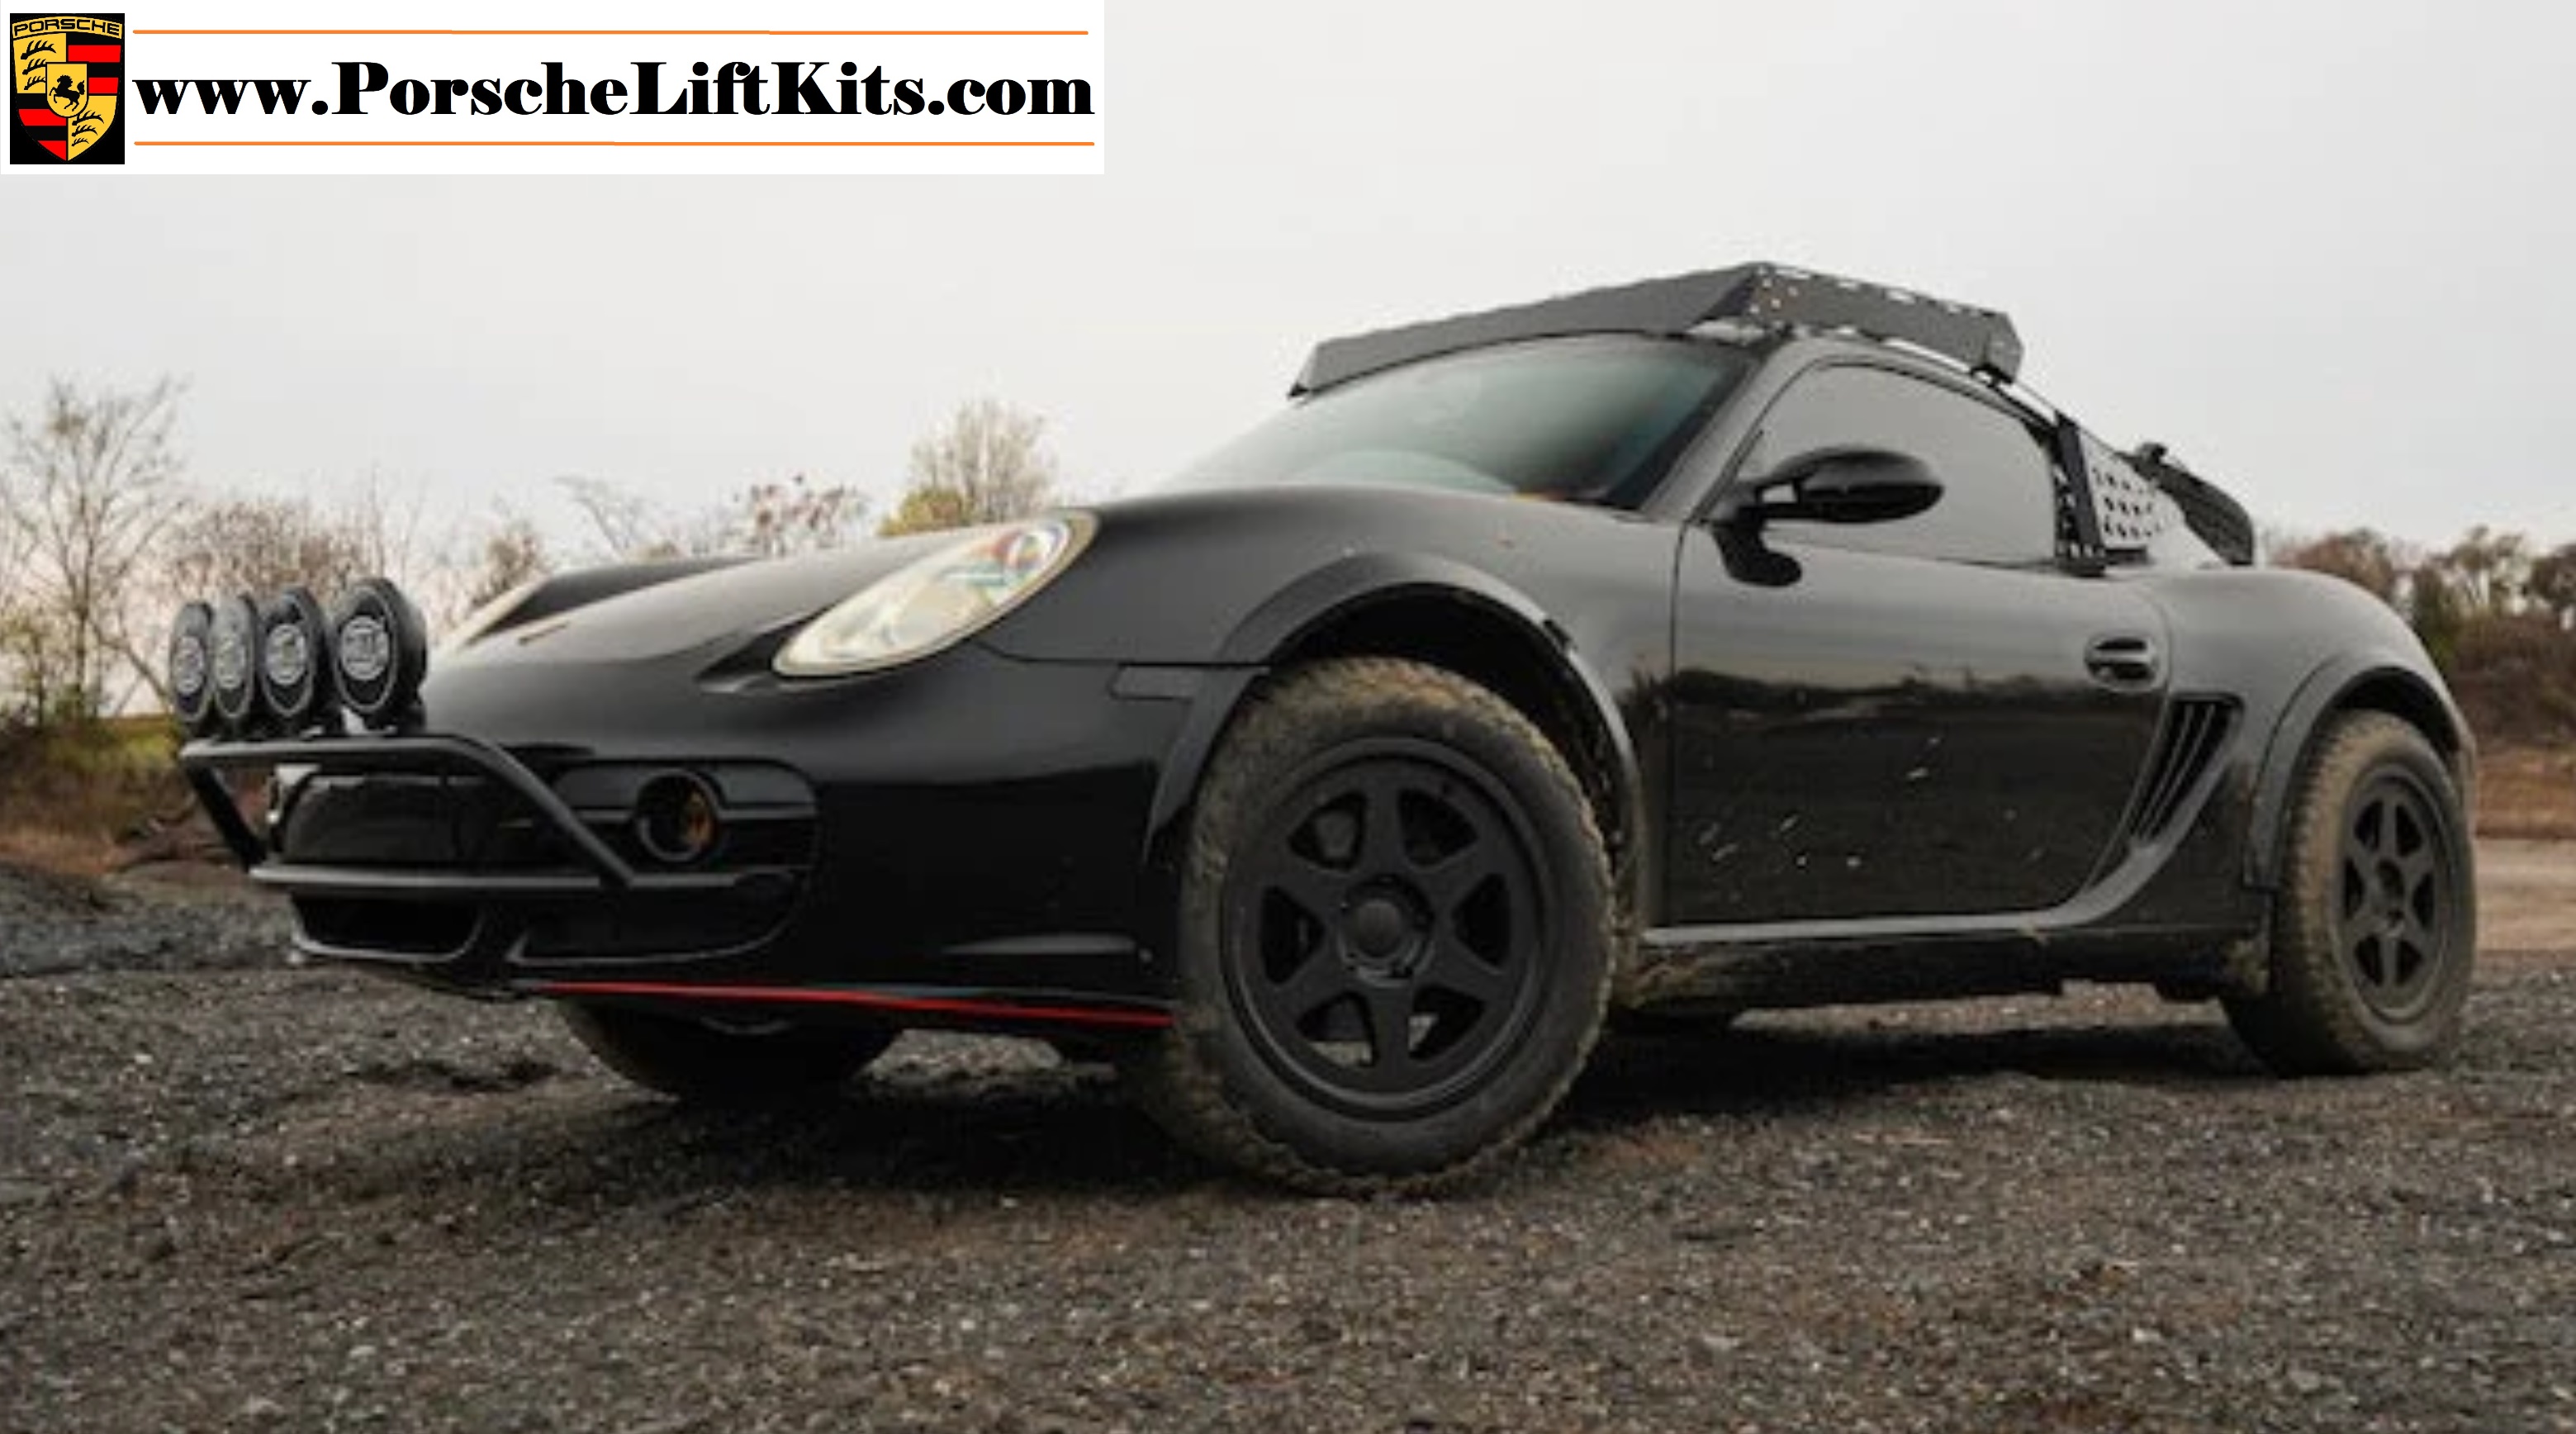 2005 Porsche Cayman 987 with two inch lift kit and larger 27-inch all-terrain tires.